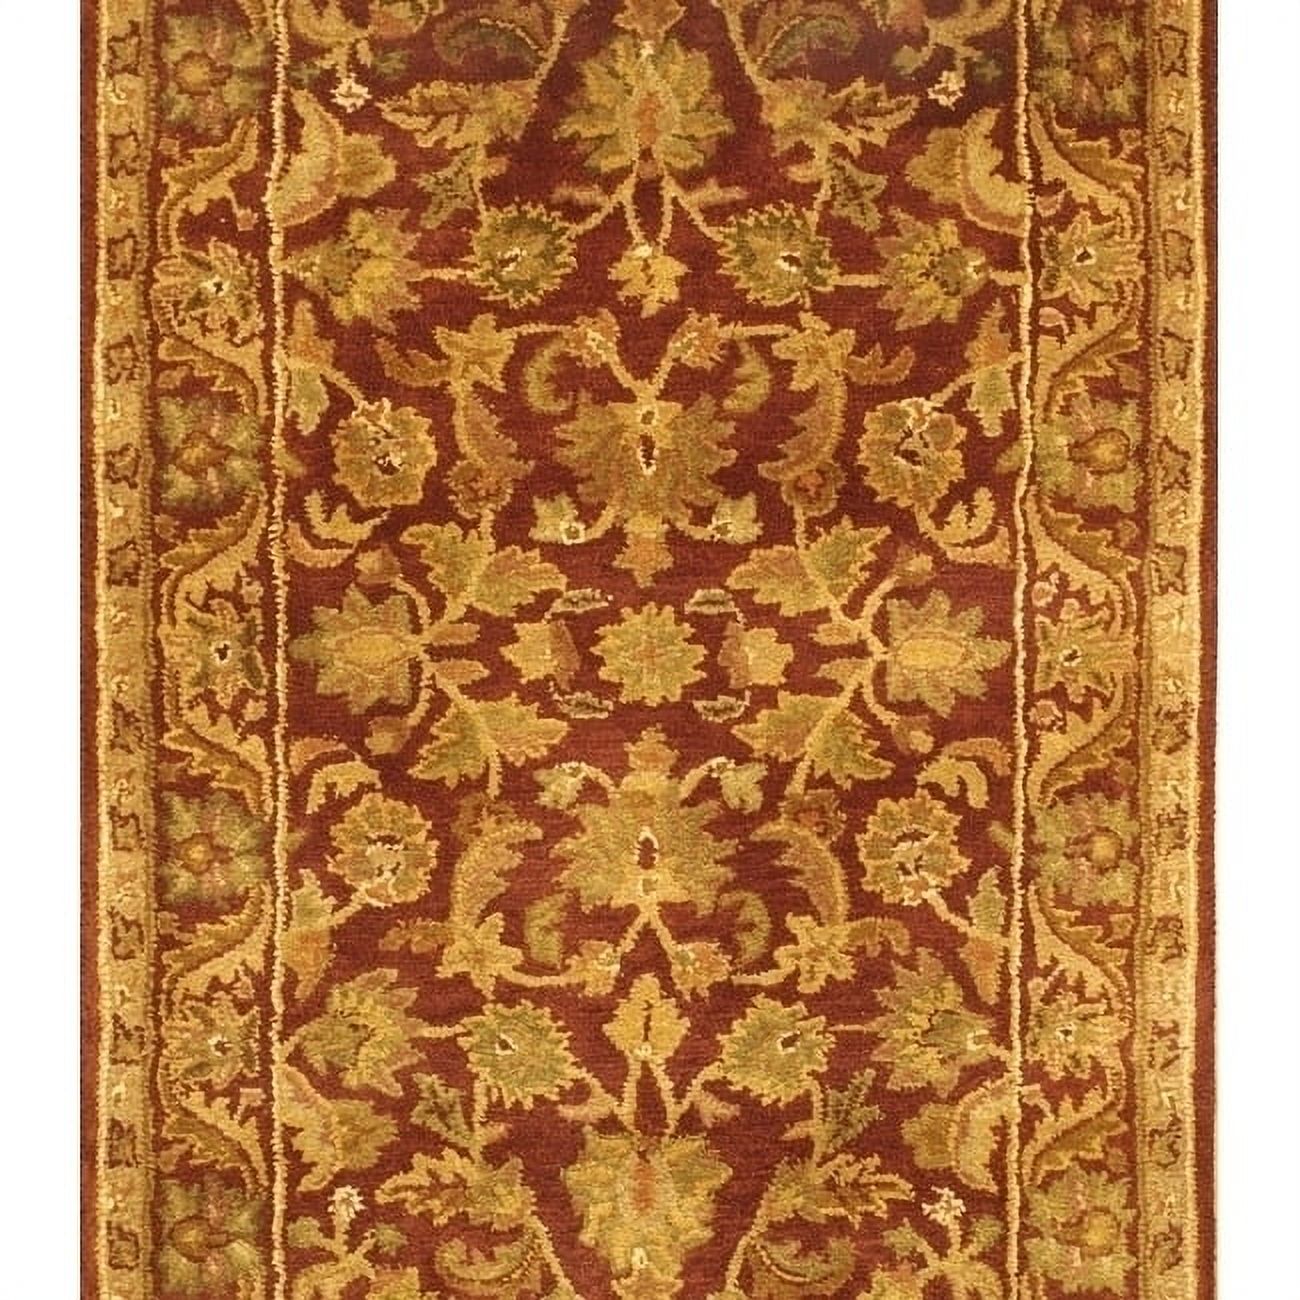 SAFAVIEH Antiquity Carmella Floral Bordered Wool Area Rug, Wine/Gold, 3' x 5' - image 1 of 10